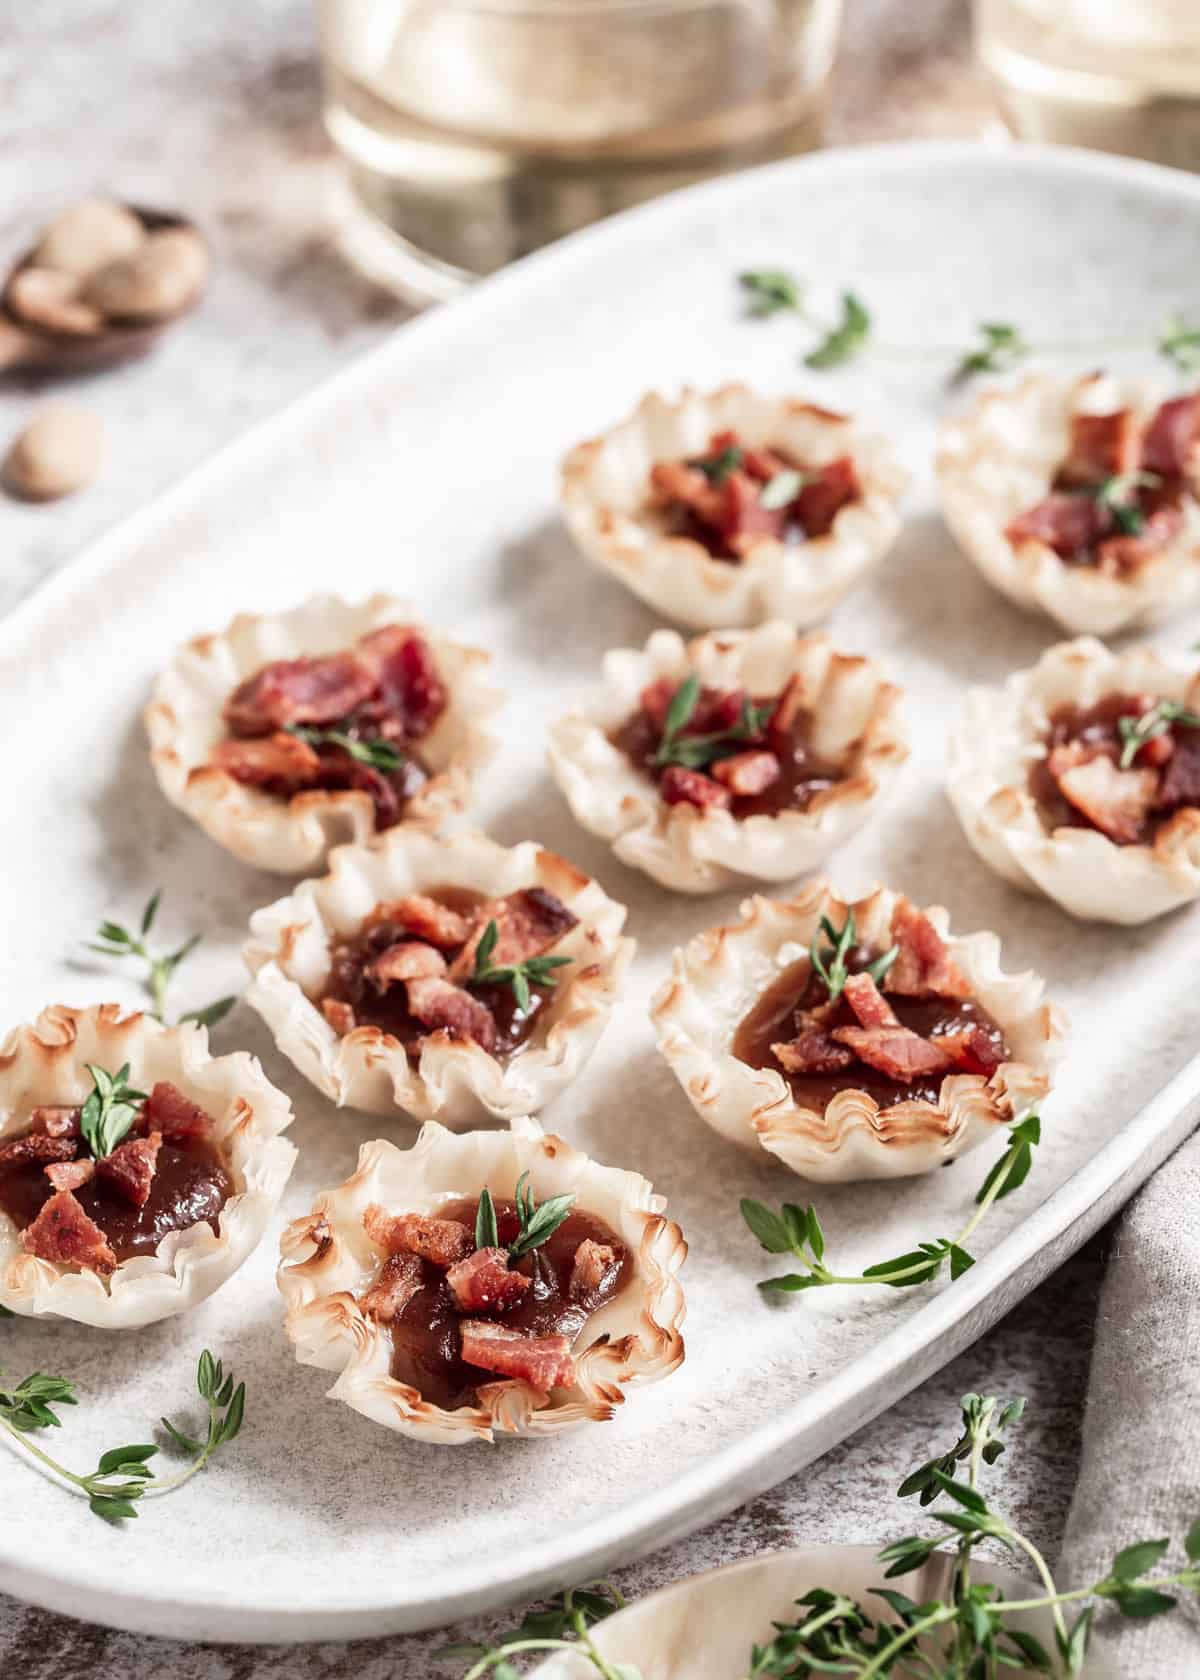 phyllo shells with brie, apple butter and crumbled bacon, on white platter.